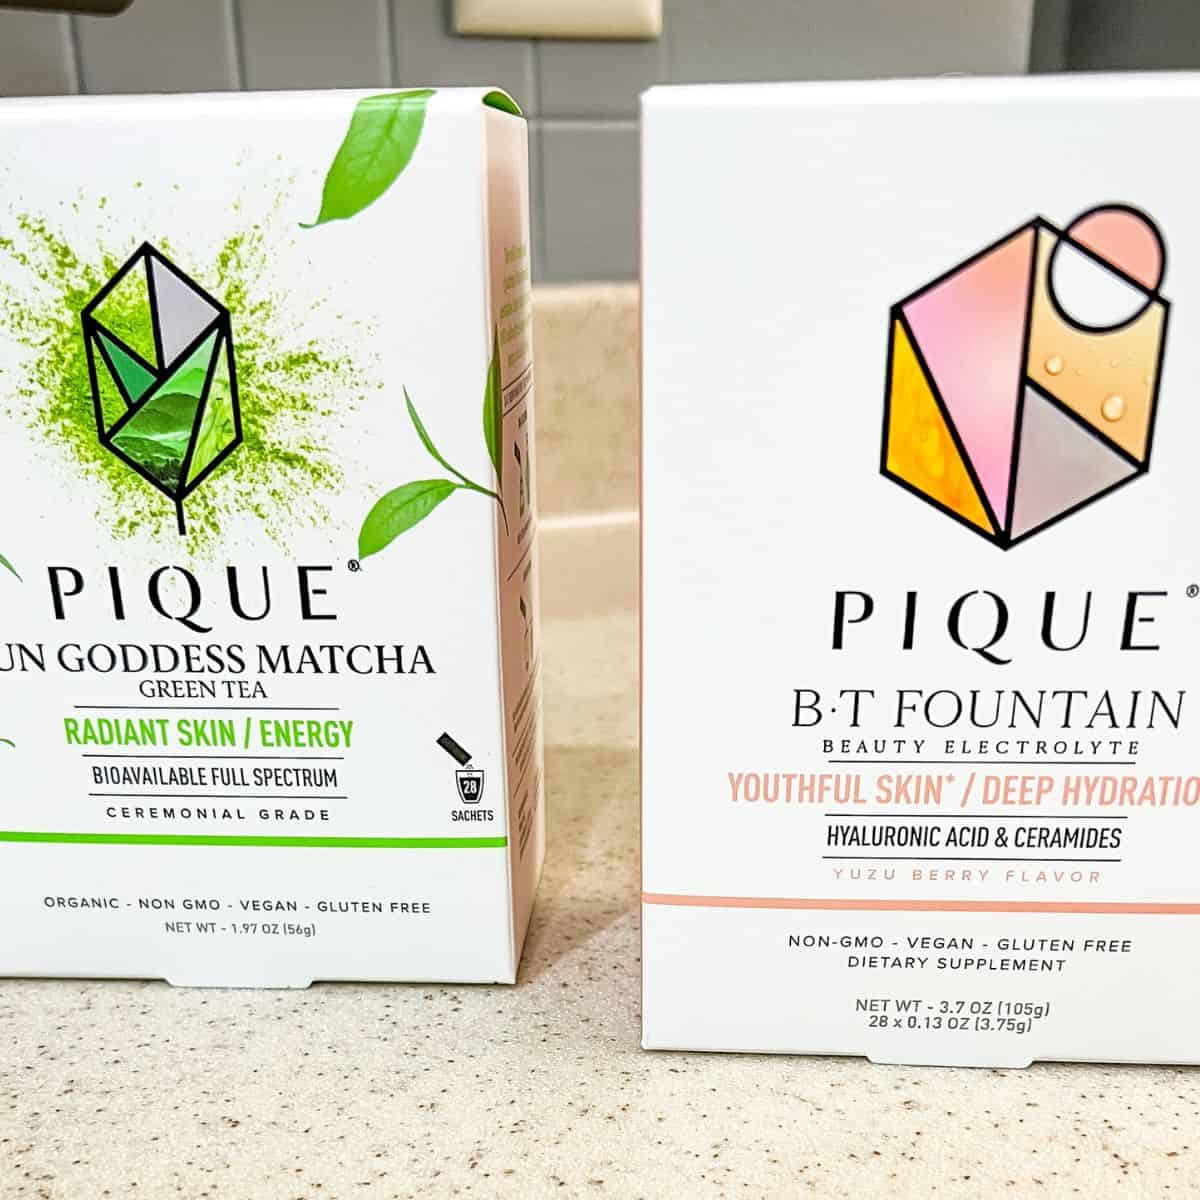 Radiant skin duo from pique life tea, clear skin solution for acne prone skin.